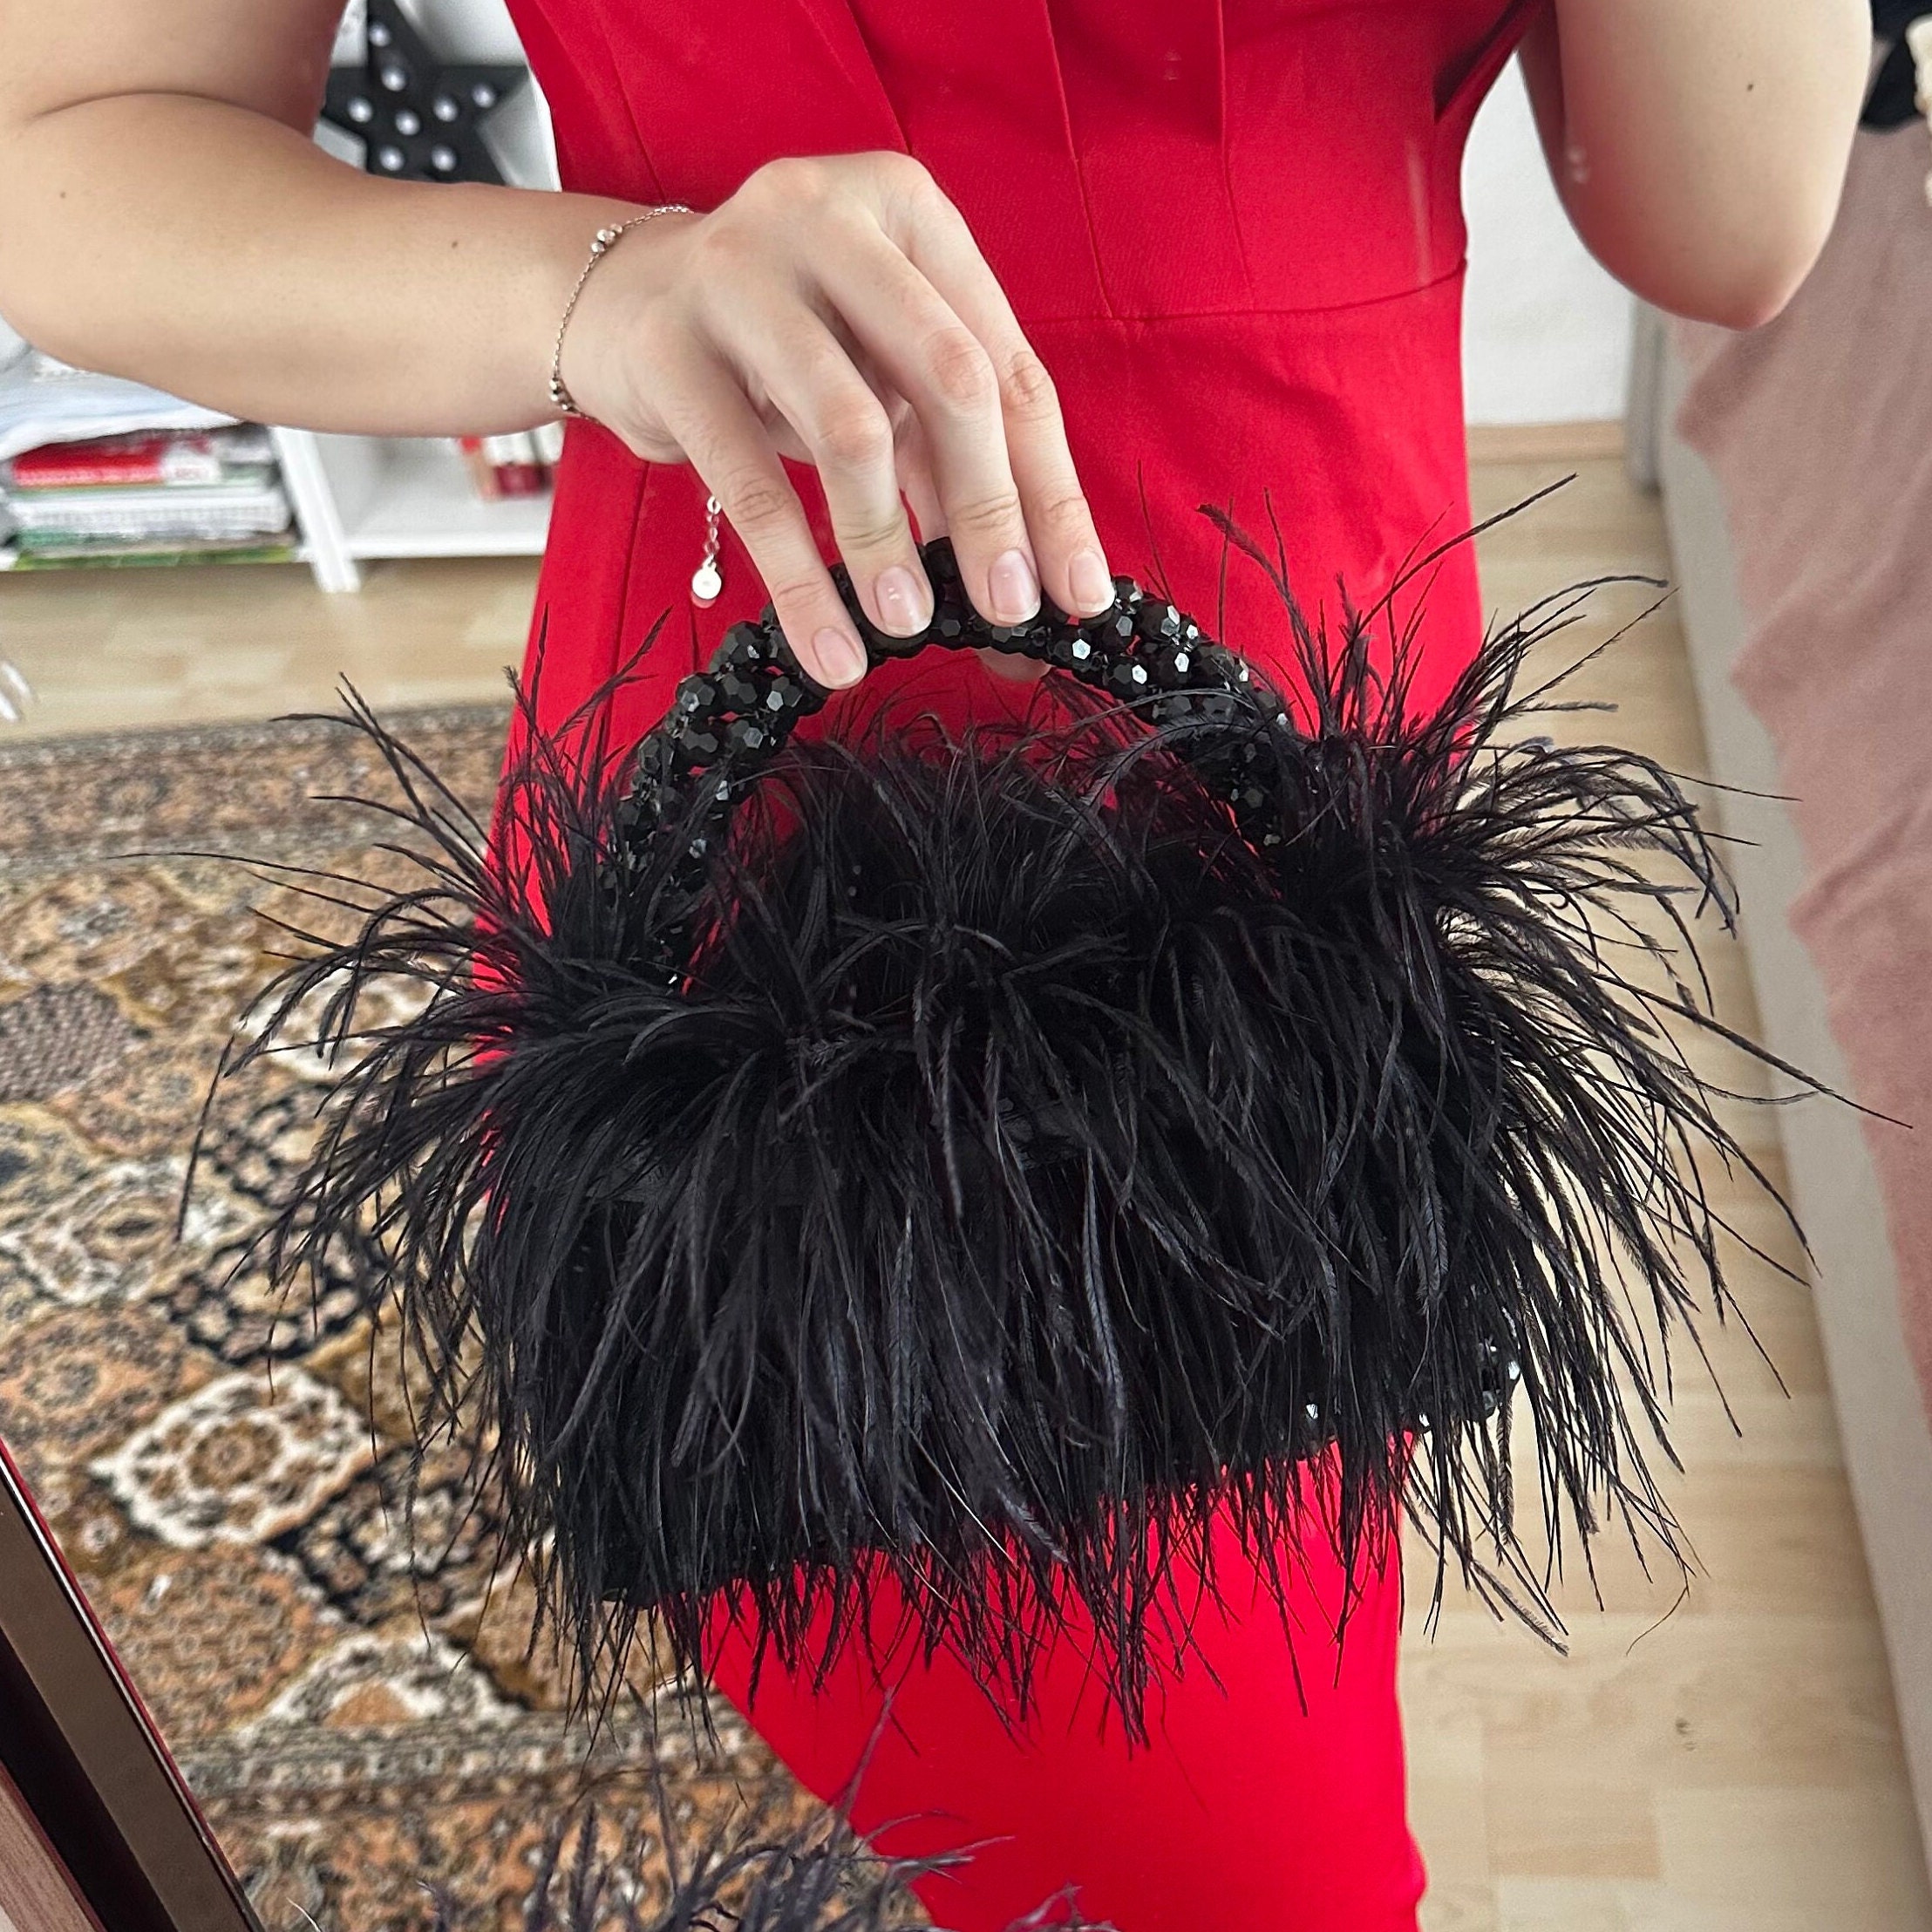 GSYPS Women's Real Natural Ostrich Feather Clutch Evening Bags Fluffy Purse Handbag Feather Tote Bag for Wedding Party